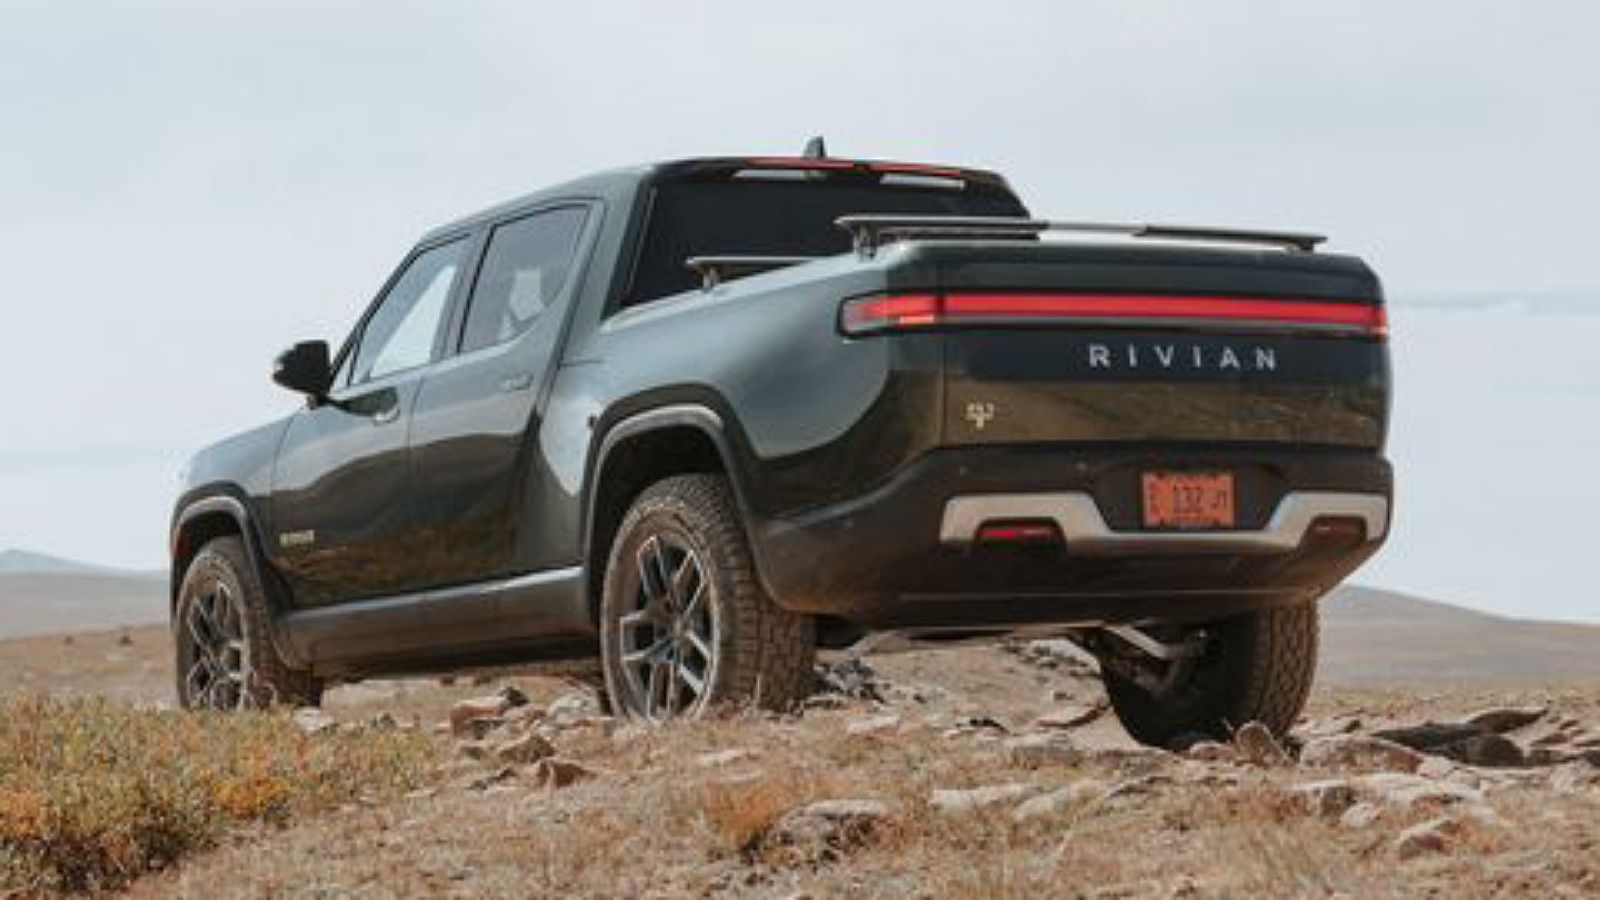 Why is the Rivian R1T the best electric pickup truck currently?